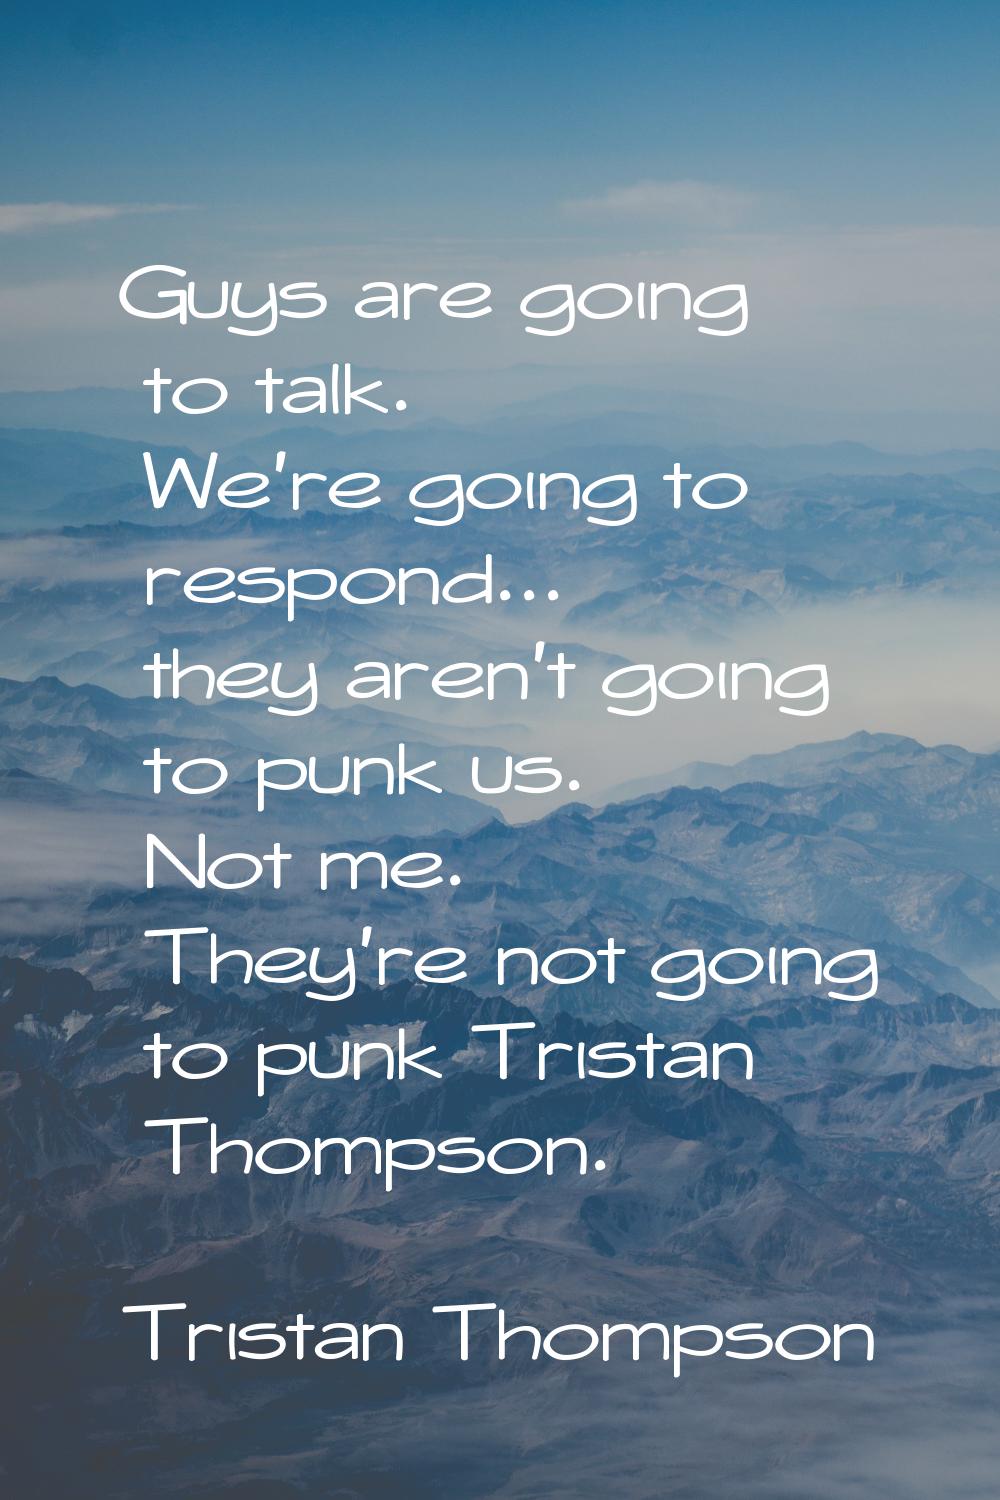 Guys are going to talk. We're going to respond... they aren't going to punk us. Not me. They're not